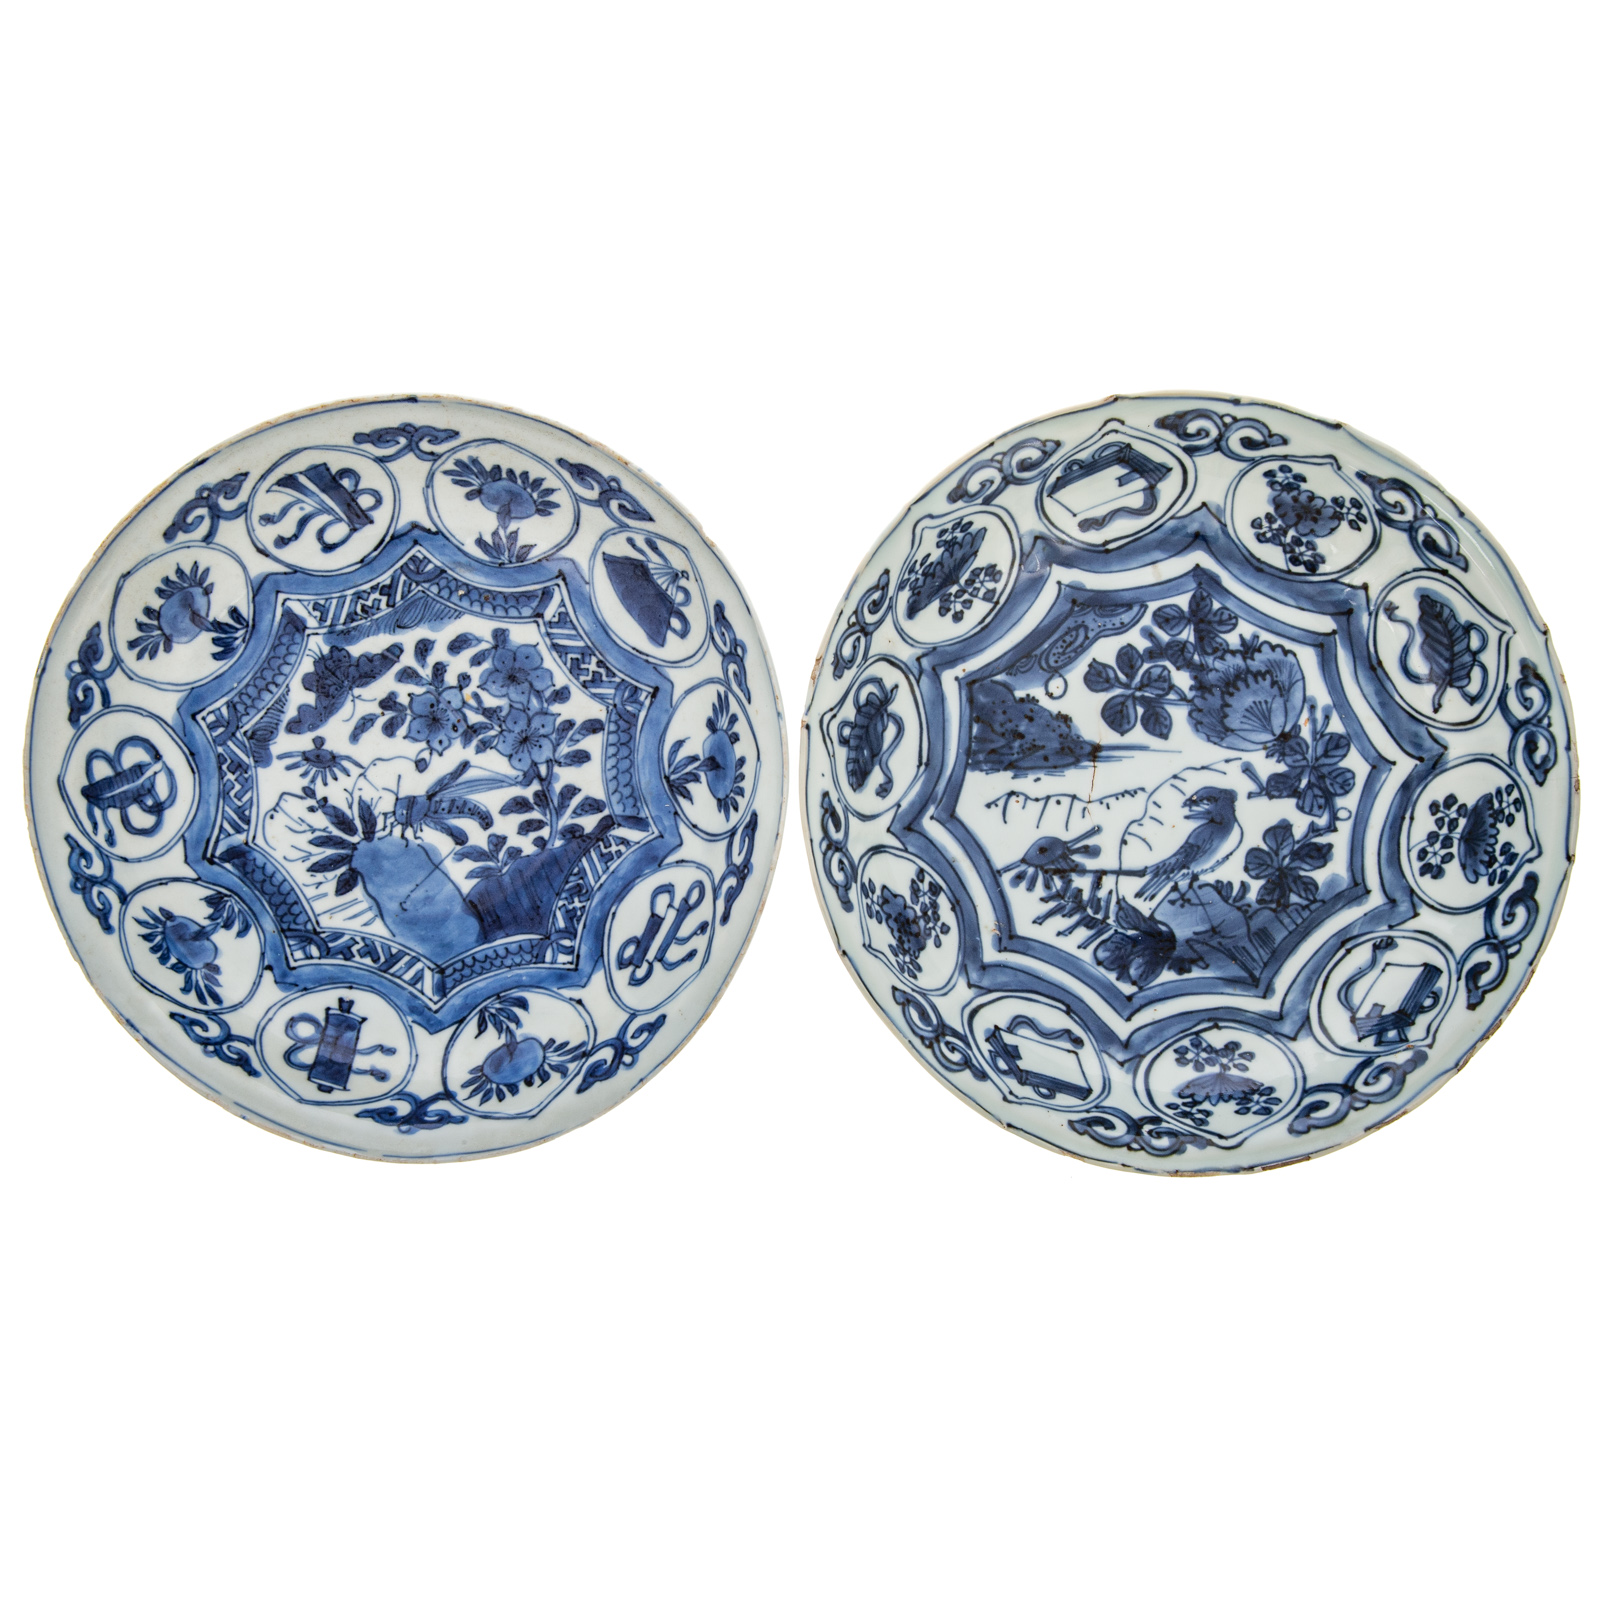 TWO CHINESE EXPORT KRAAK BOWLS 36a64f